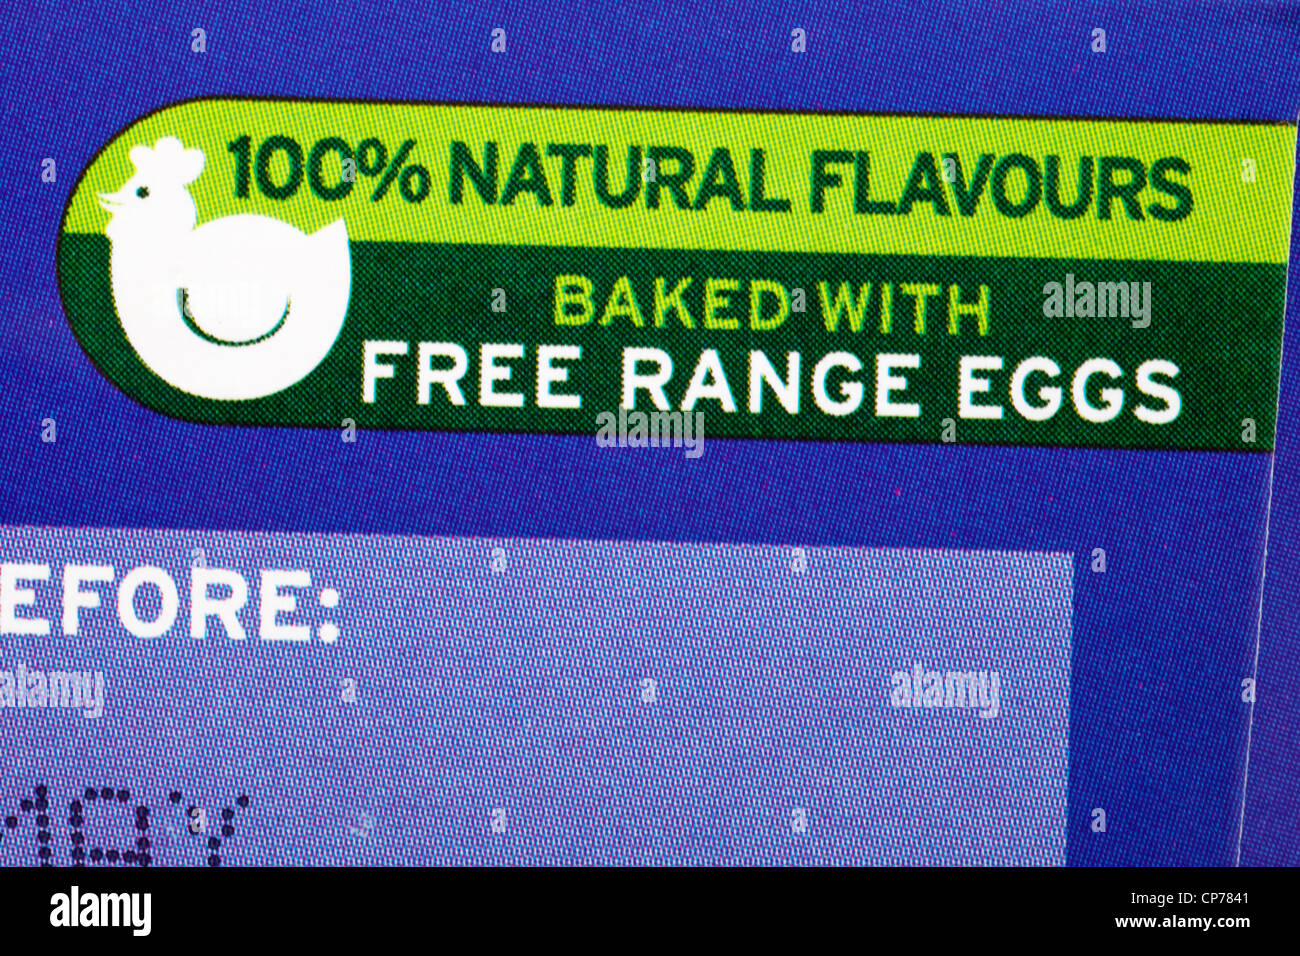 100% natural flavours baked with free range eggs - detail on box of special edition Mr Kipling exceedingly good 8 Great British Fancies cakes Stock Photo